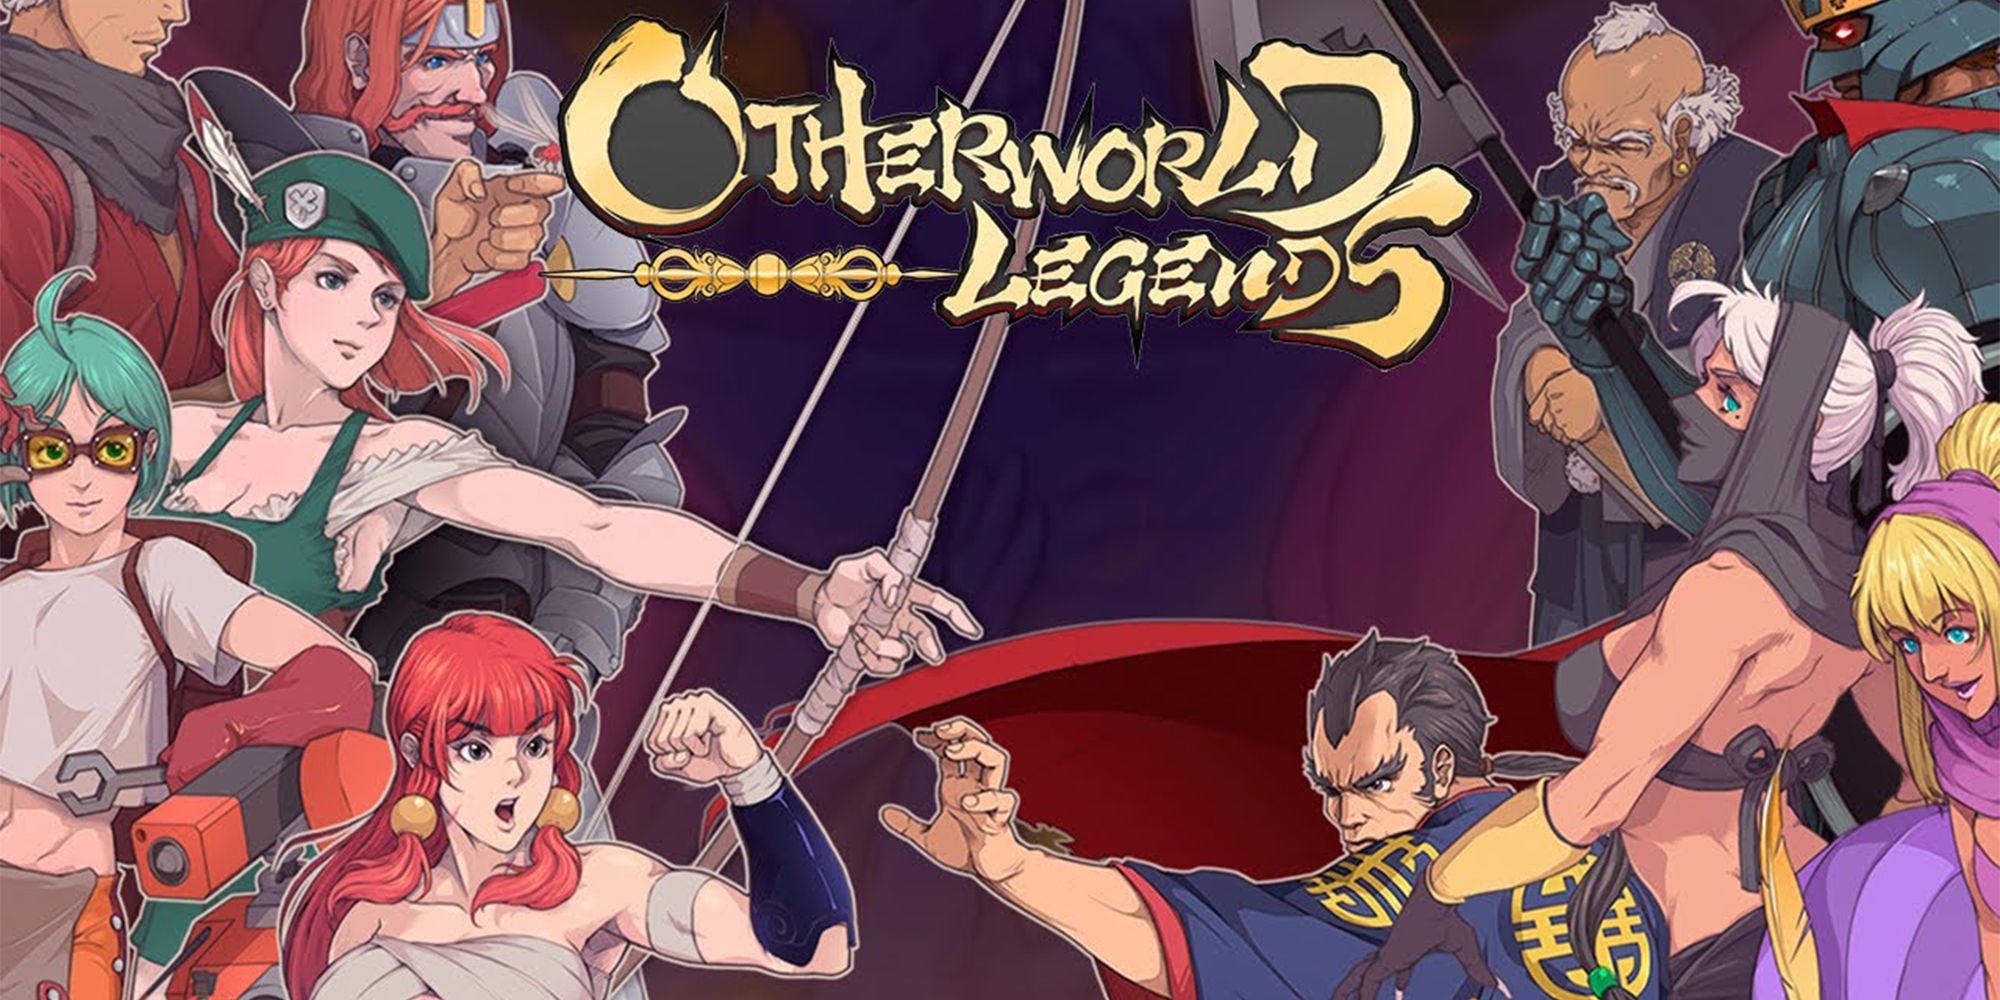 otherworld legends title art featuring its characters